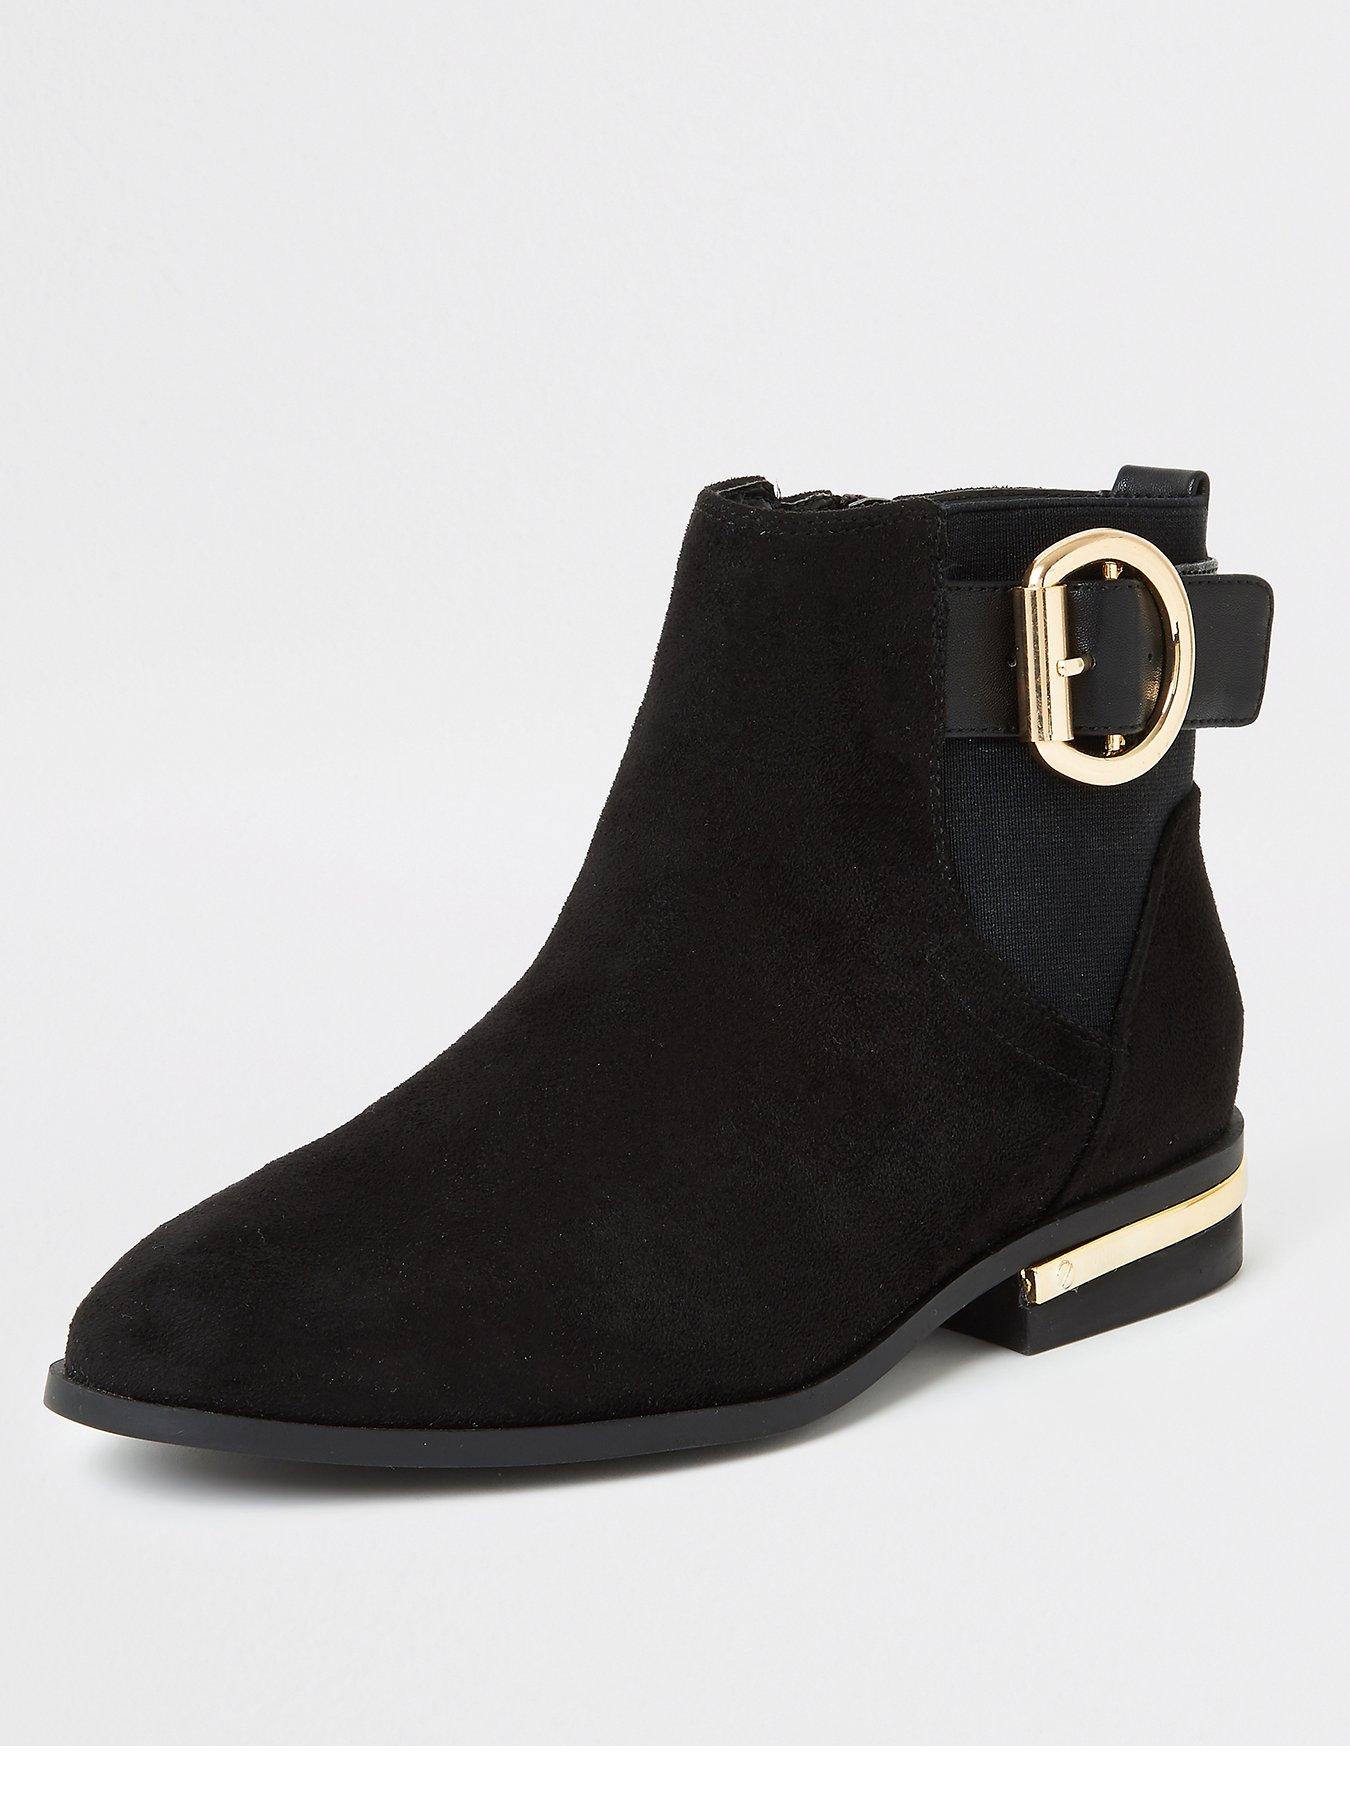 flat ankle boots uk